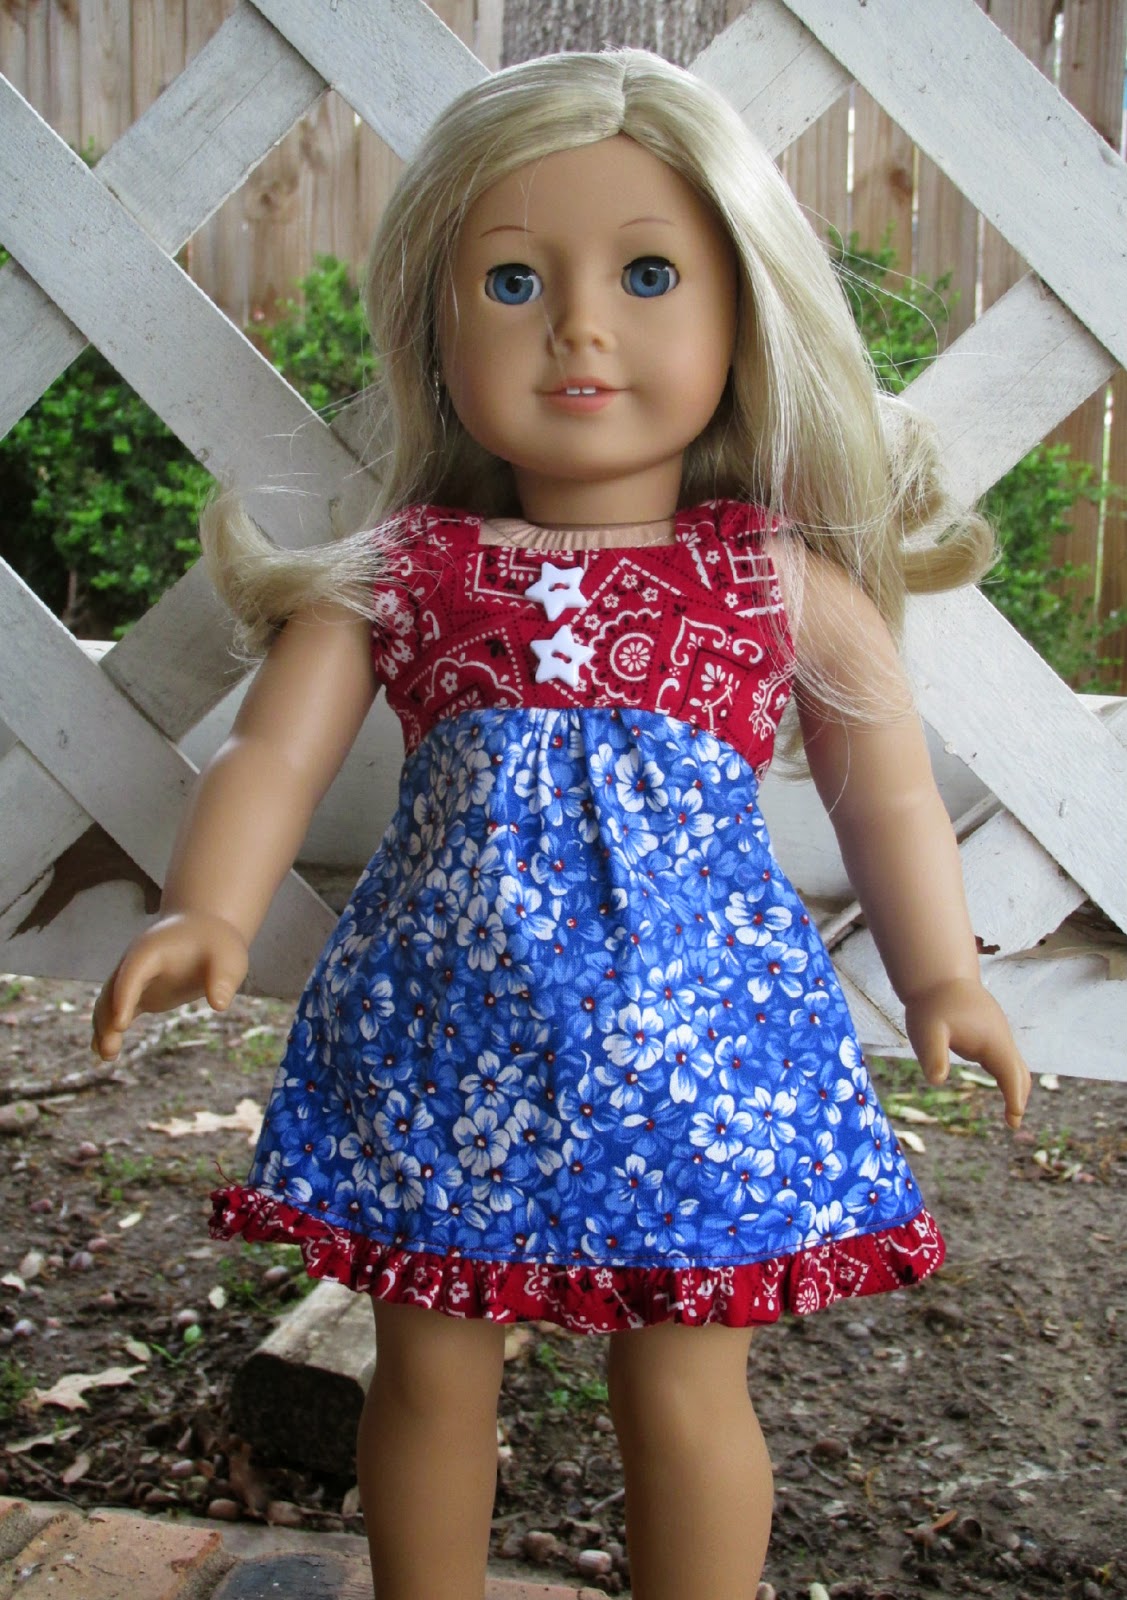 Everything Nice 4 Dolls: Memorial Day Outfits